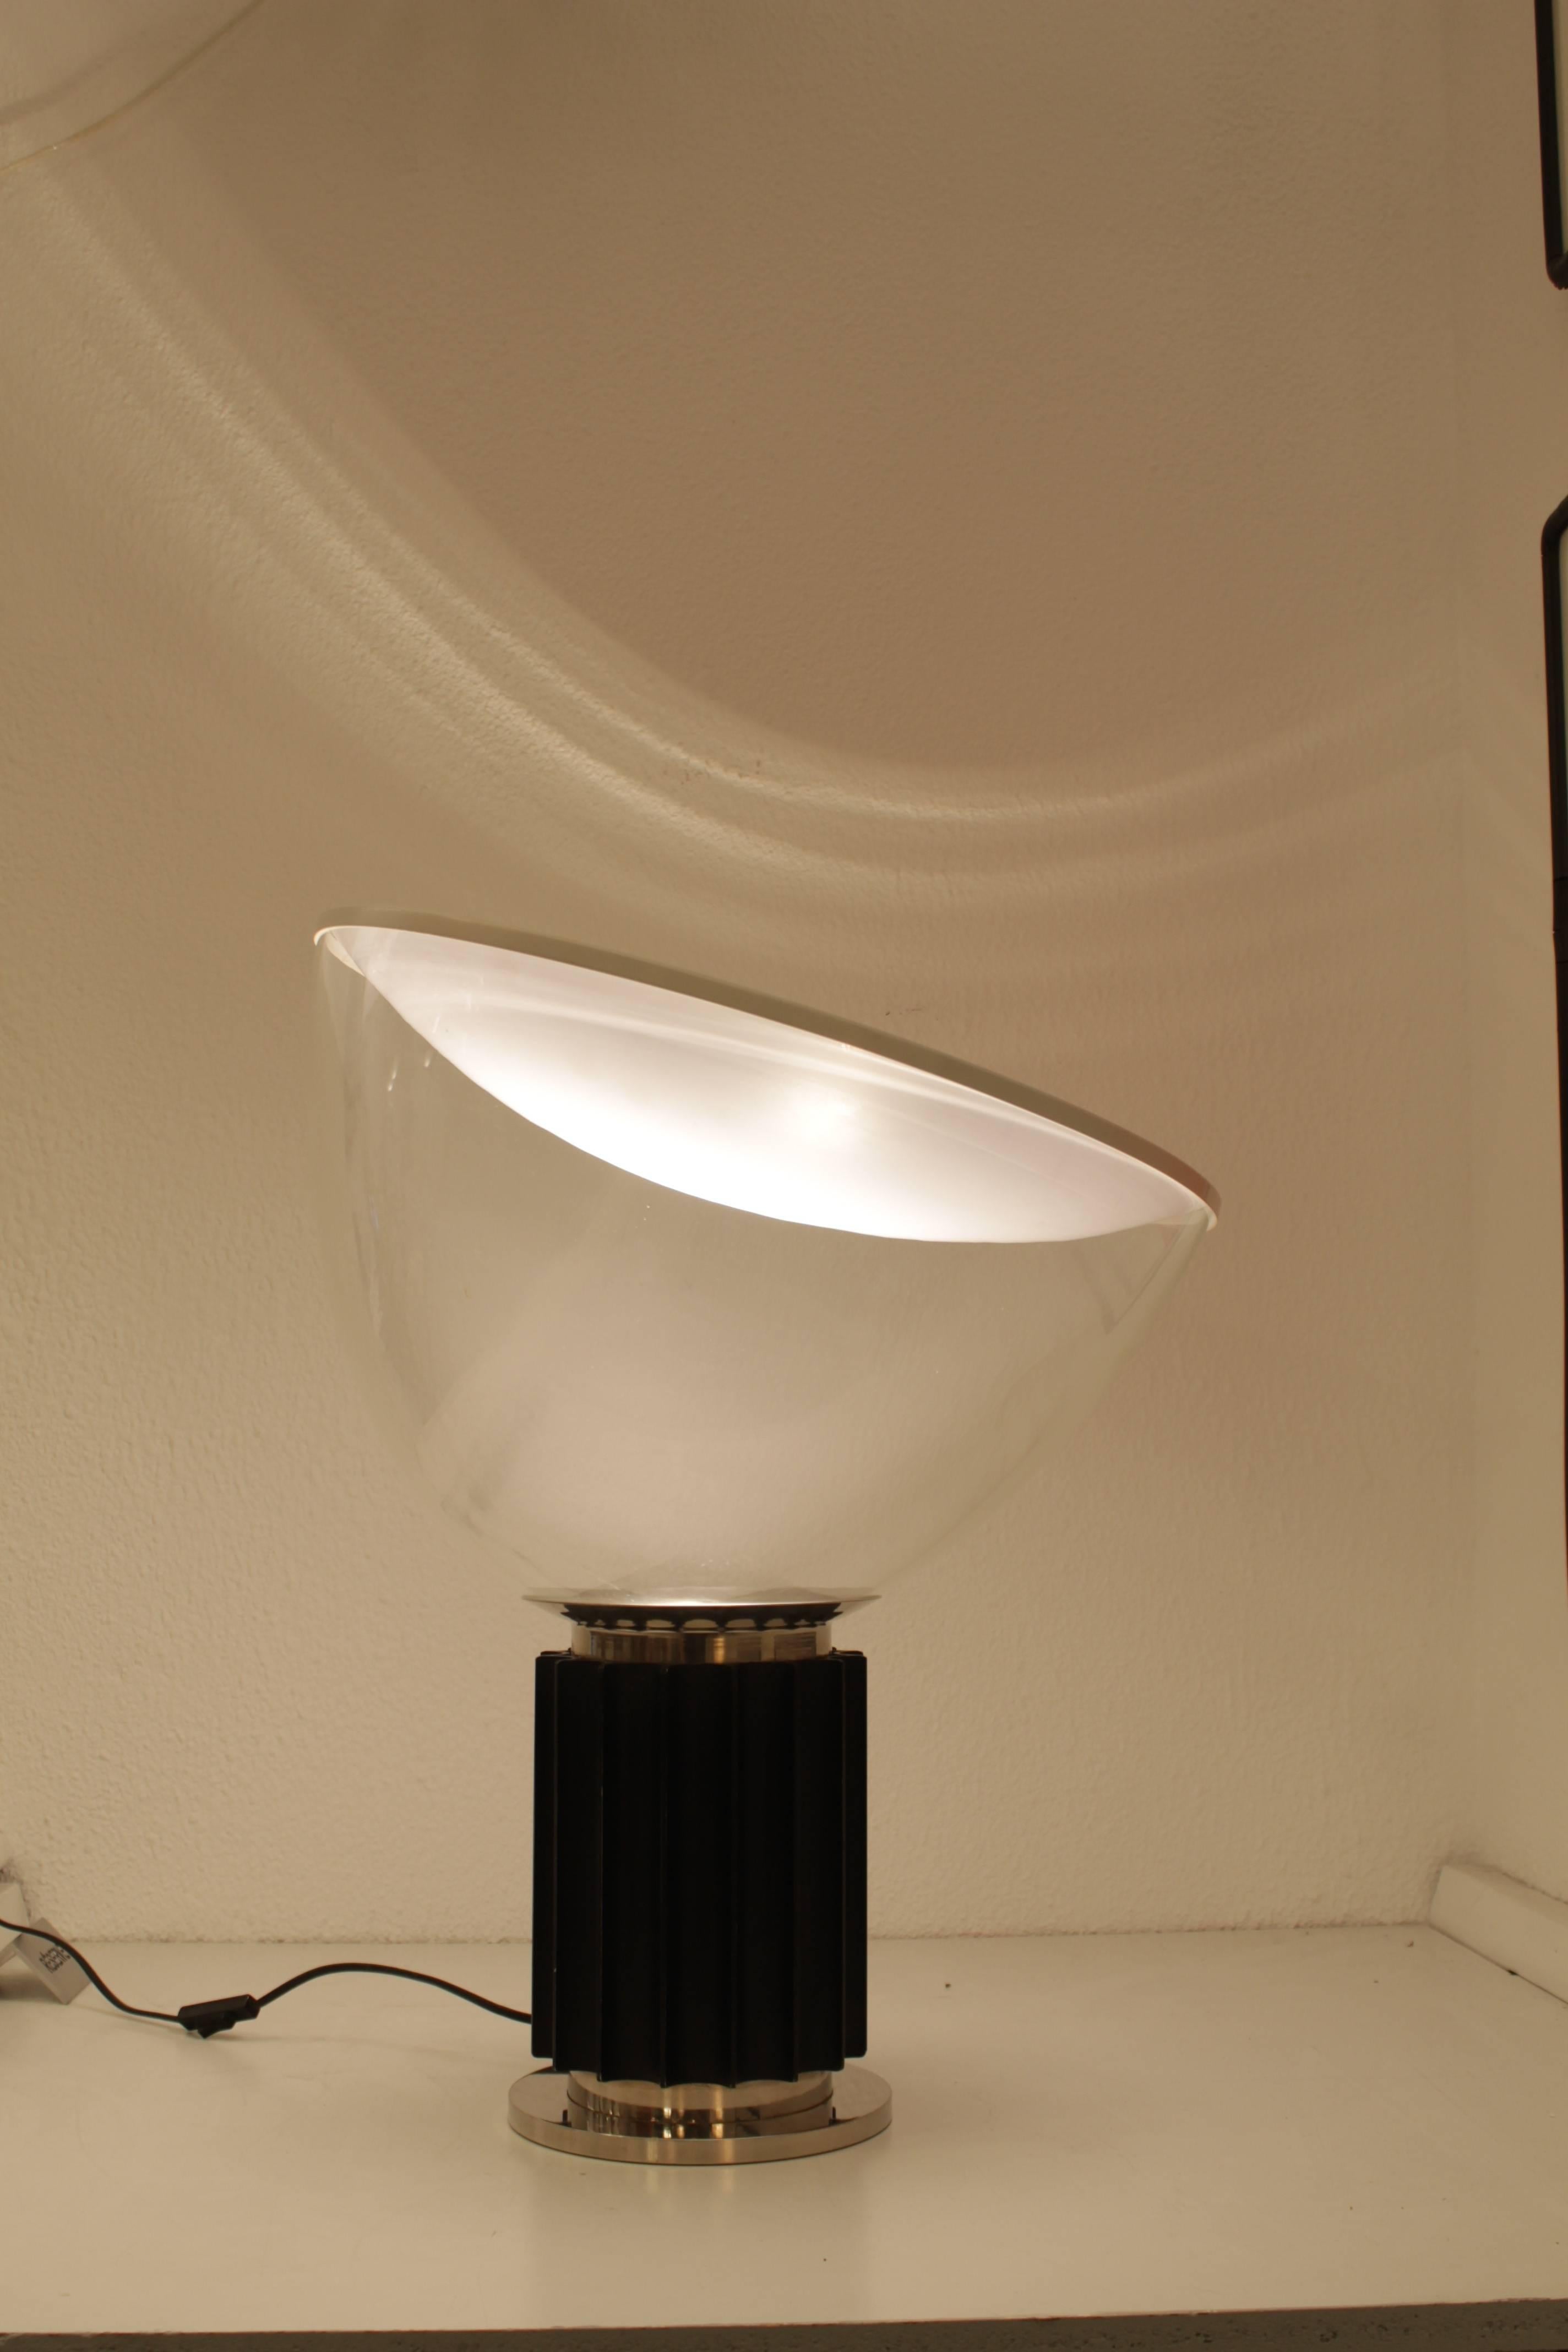 Taccia sculptural table lamp by Achille Castiglioni for Flos, circa 1962
Big glass dome laid on steel base, the dome can slide on the base to change the light orientation.
Very good vintage condition, this is an early production, circa 1965.